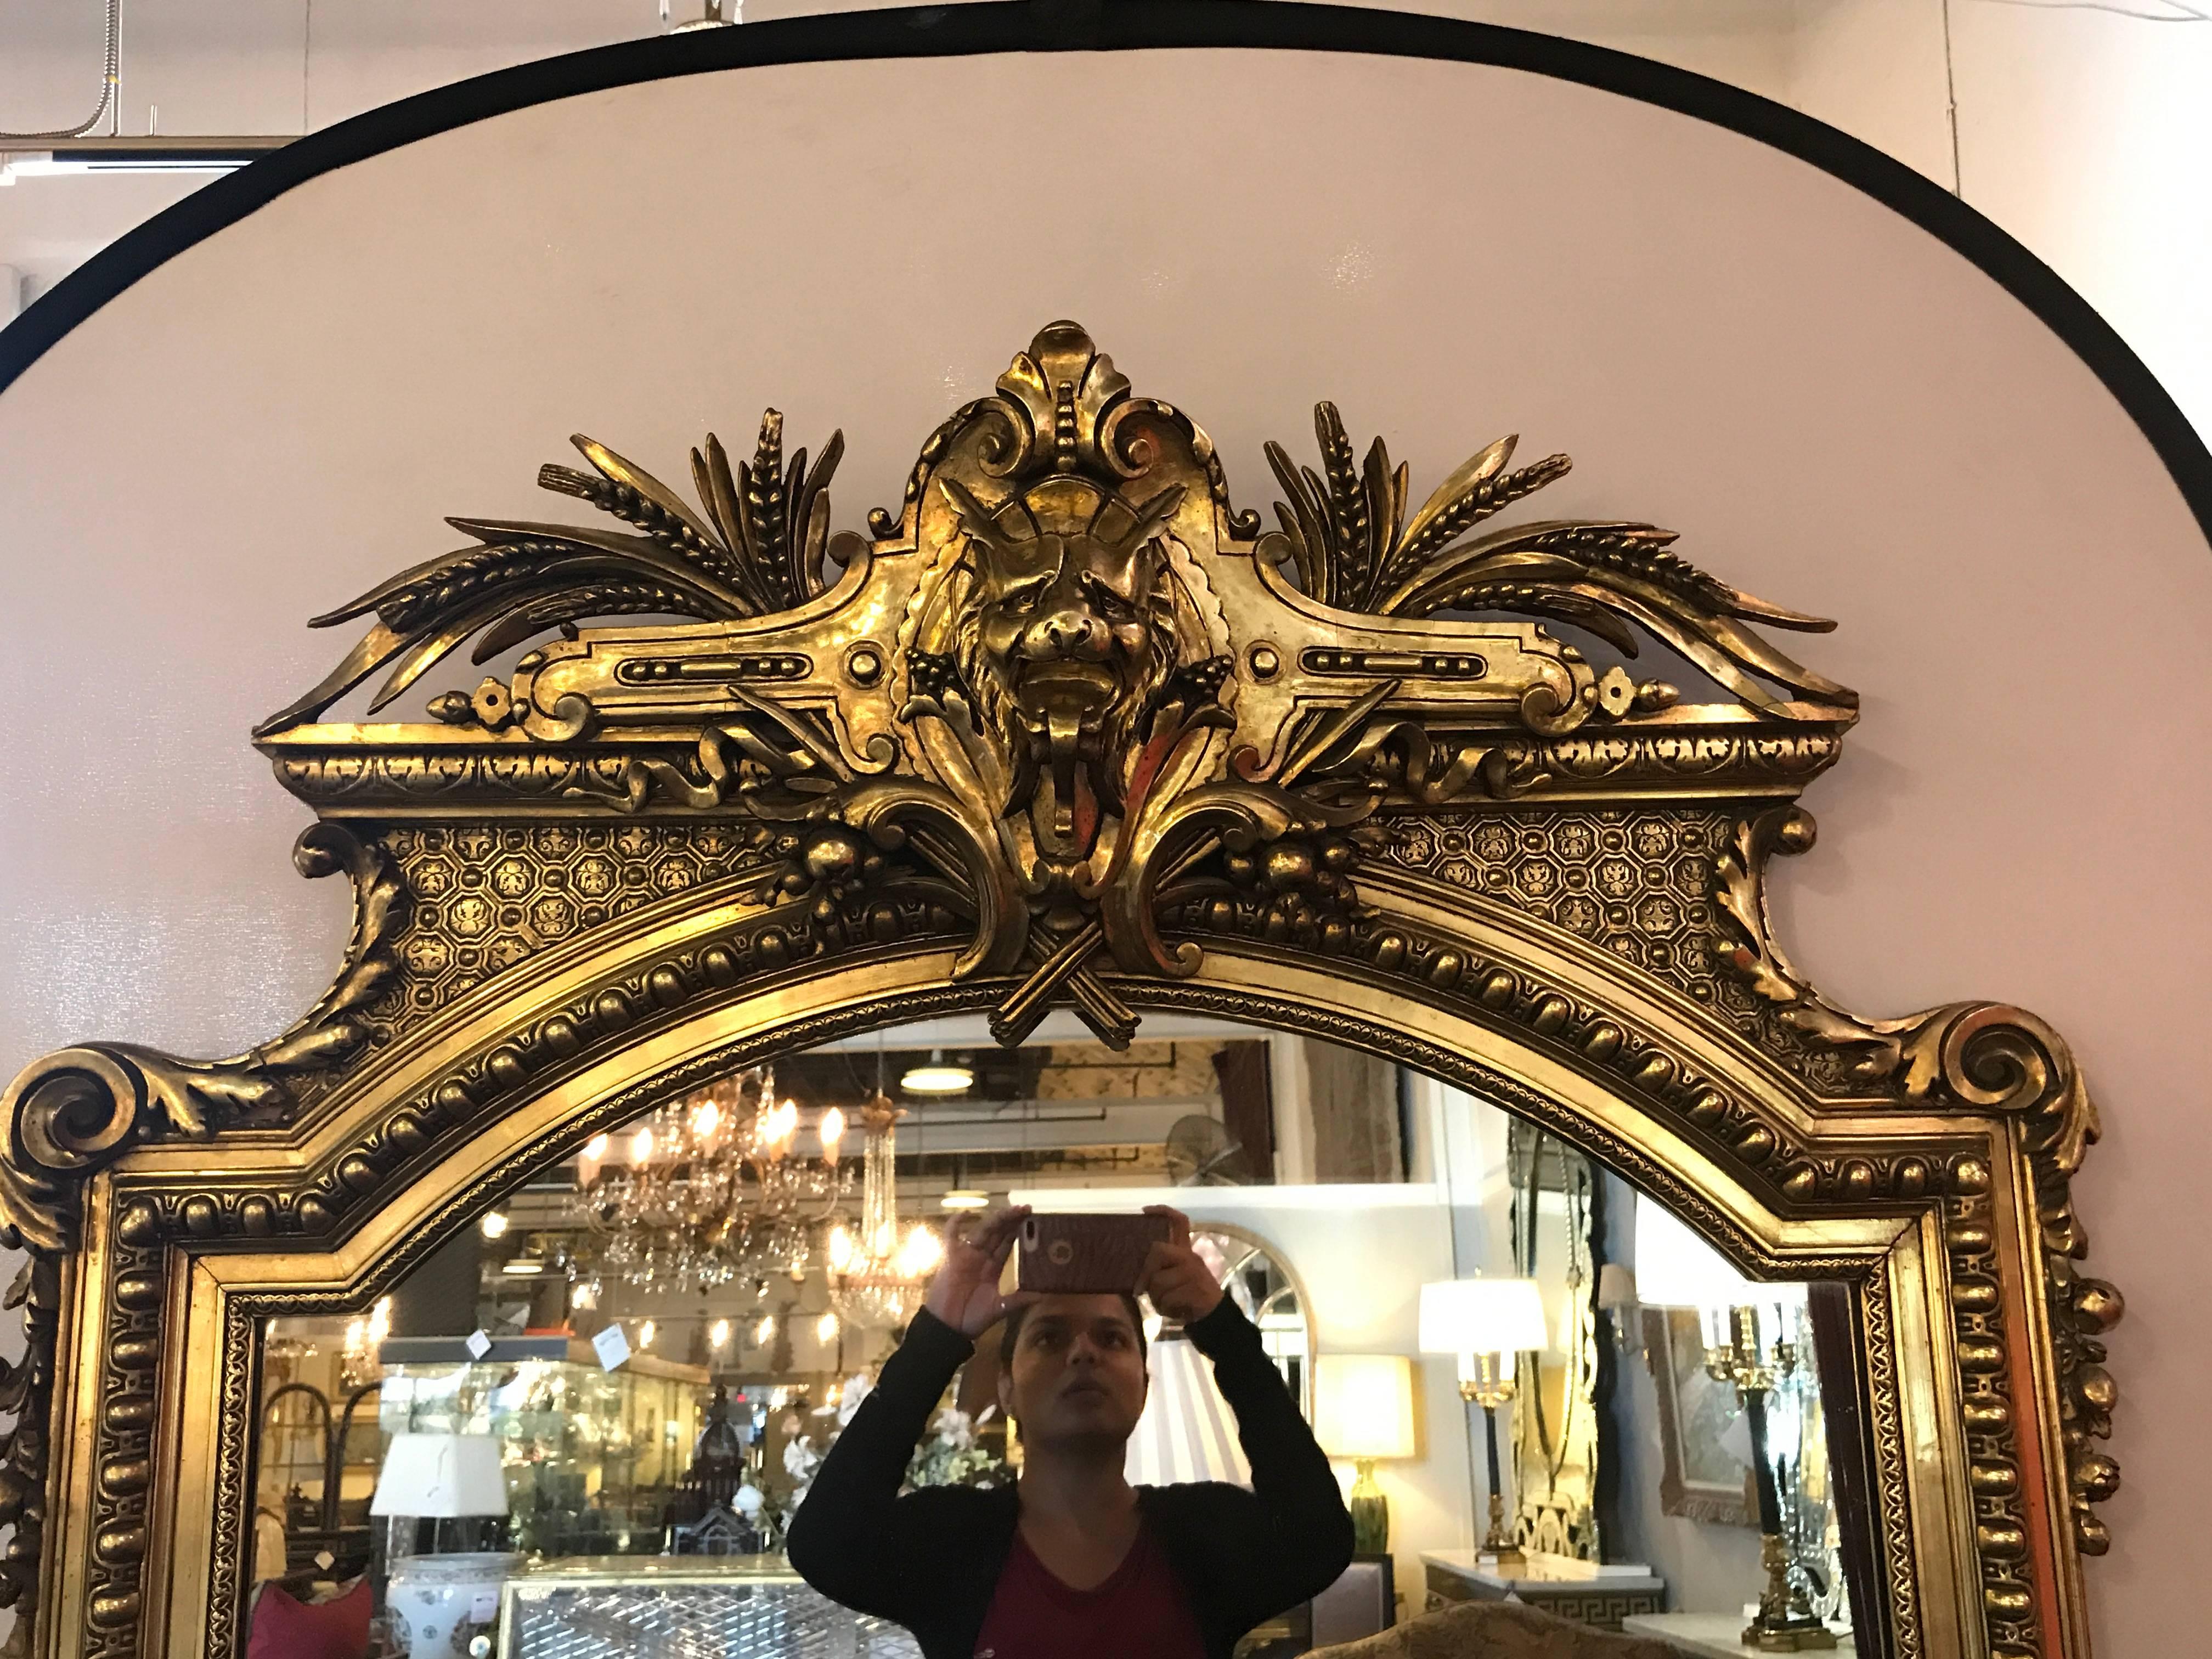 19th century console or pier mirror with carved lion form crest. This mirror with possibly the finest gilt gold I have ever seen. The center panel in a gilt frame of rectangular form with button framing. The whole terminating in a finely carved loin